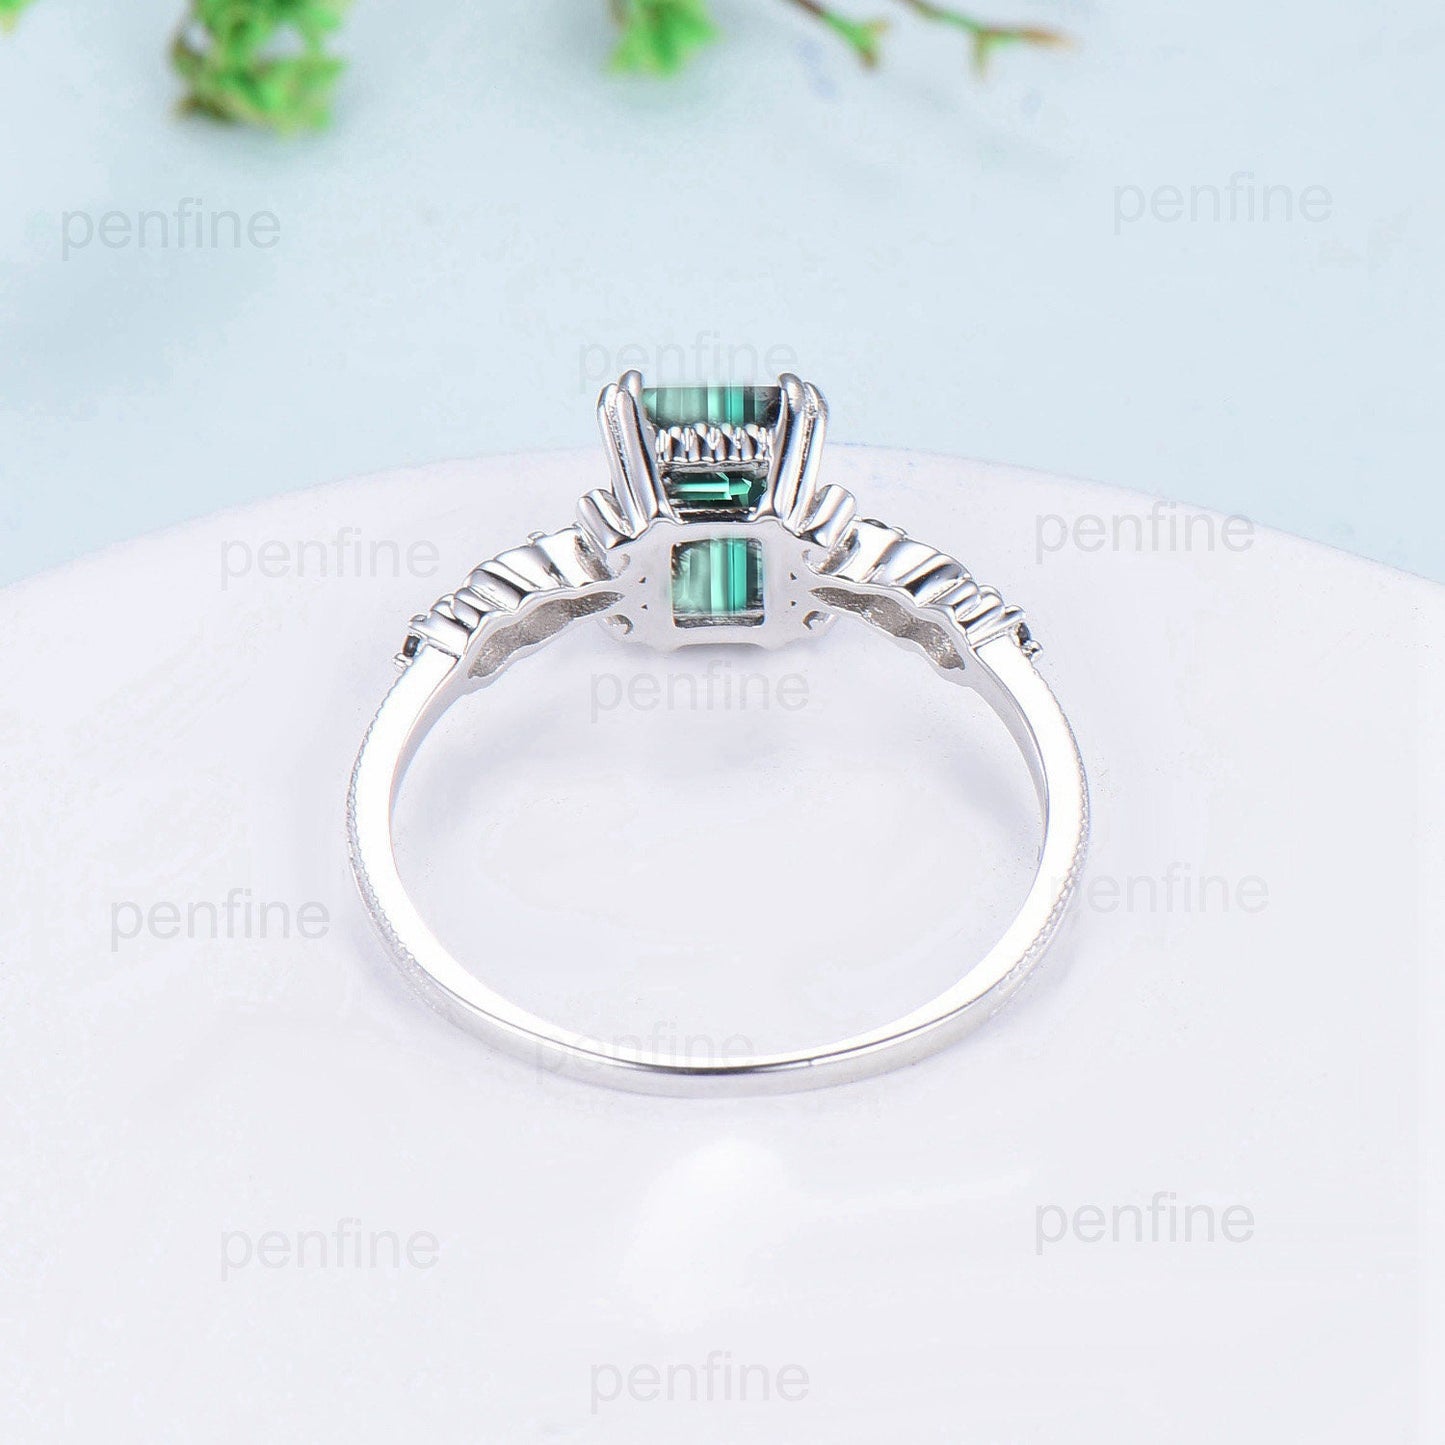 Unique Emerald Cut Green Sapphire Ring 8 Prongs Vintage Inspired Teal Sapphire Engagement Ring Green Black Crystal Wedding Ring for Women - PENFINE